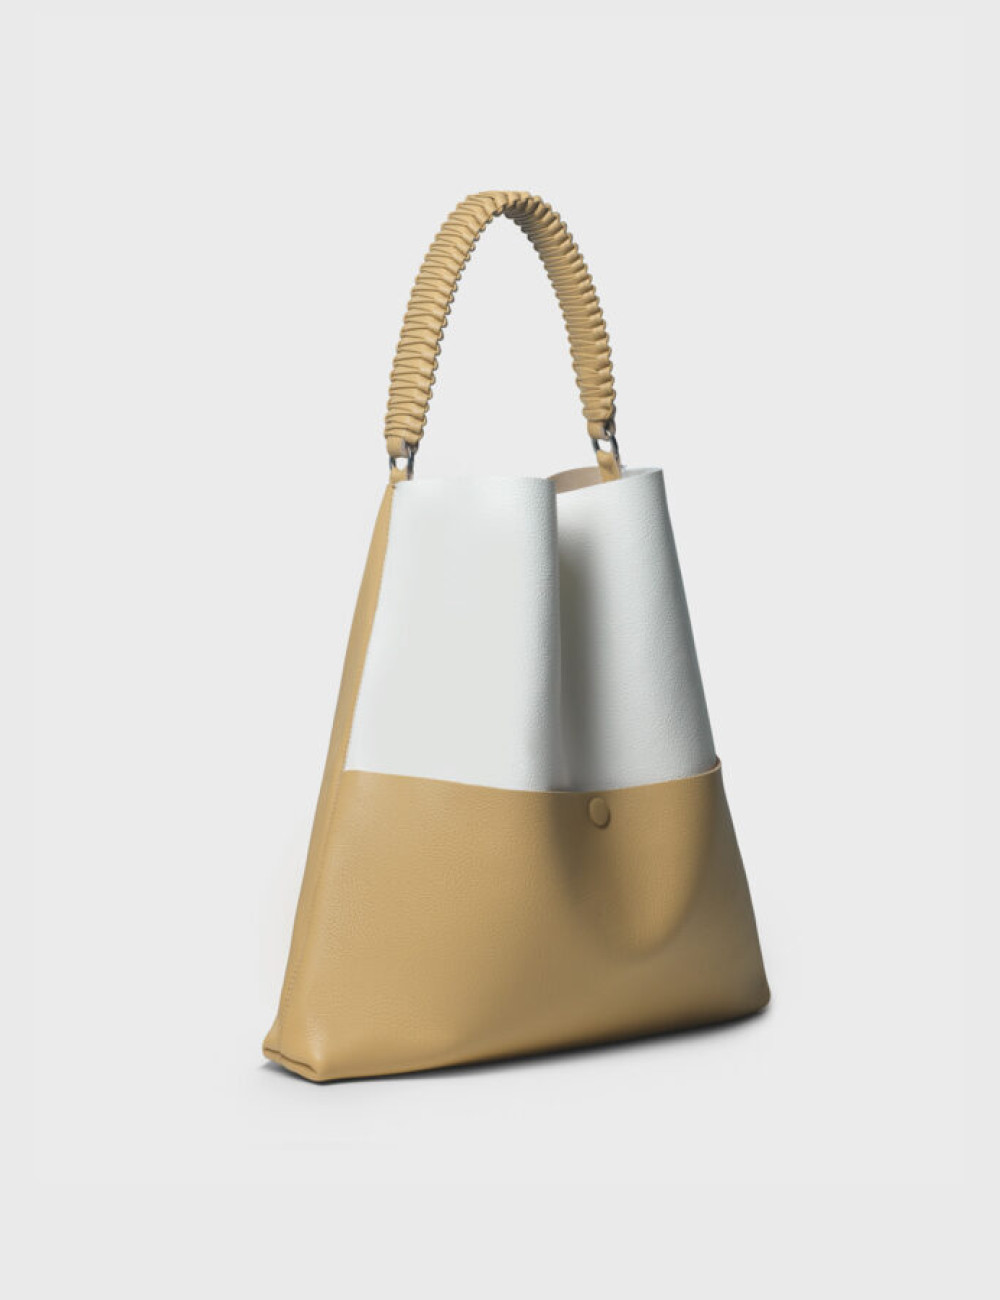 Woman's Two Colors Tote Bag